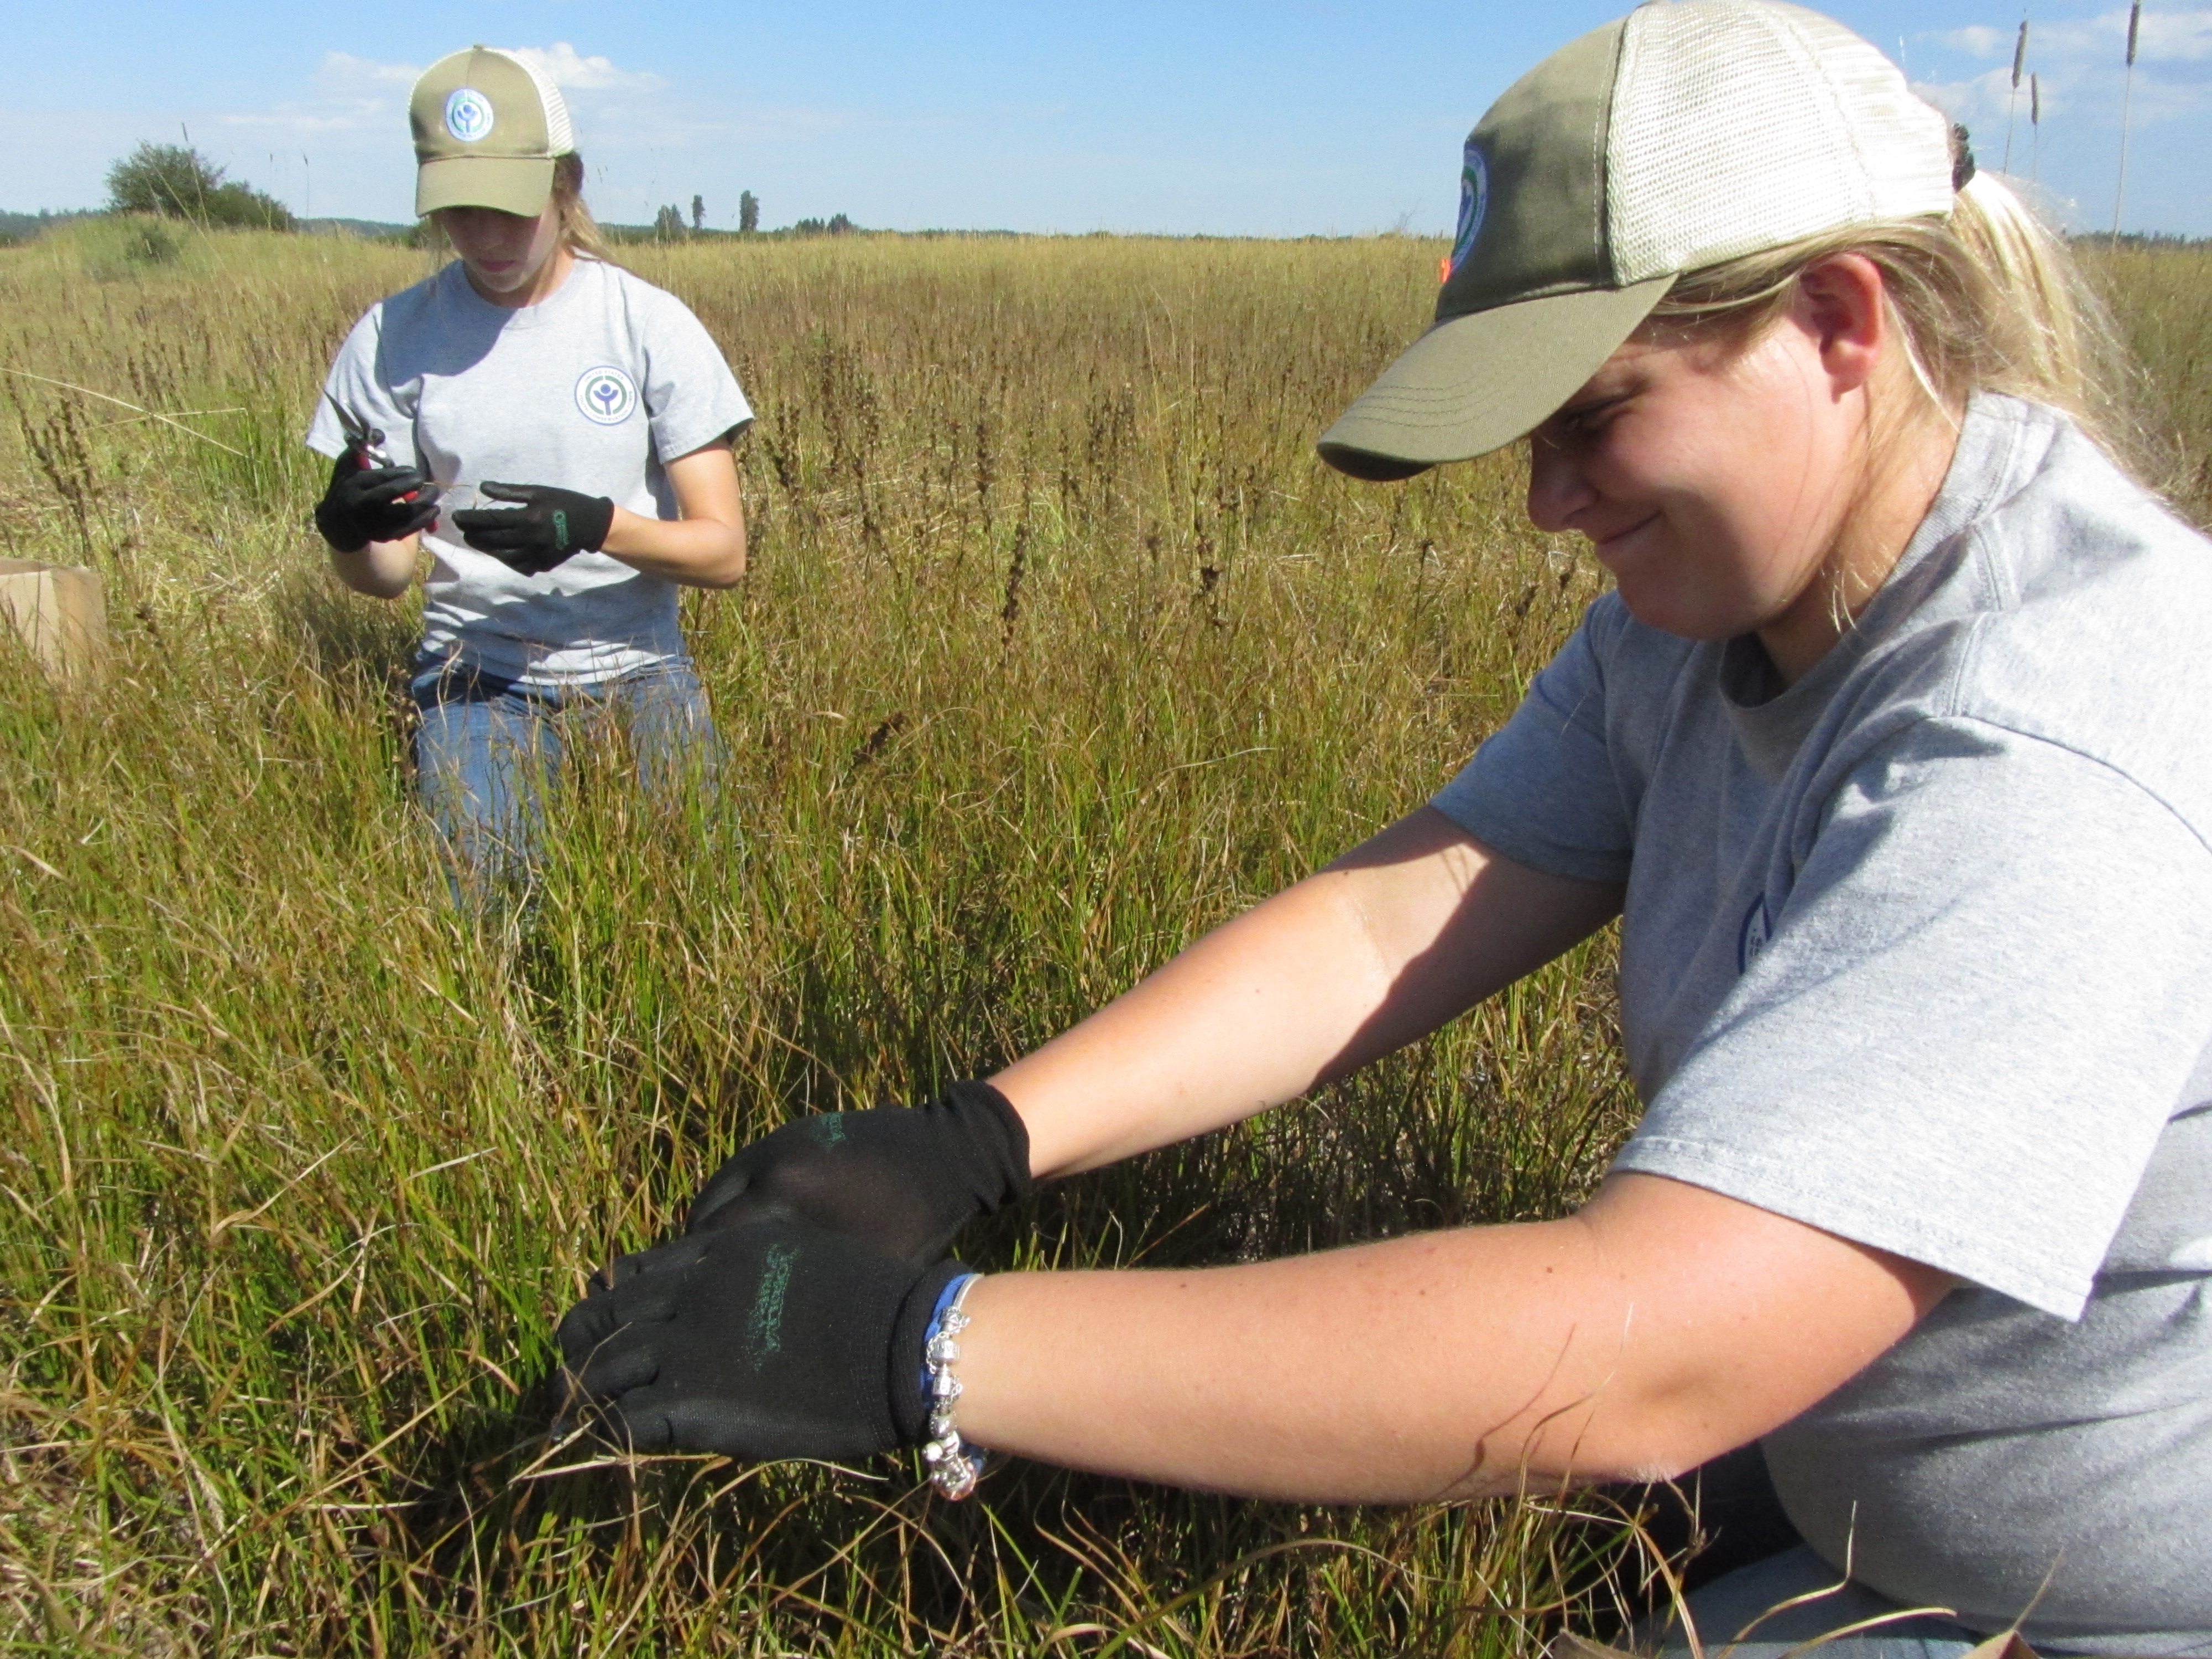 Two people in grey t-shirts and black gloves stand in a field with tall grass up to their waist.